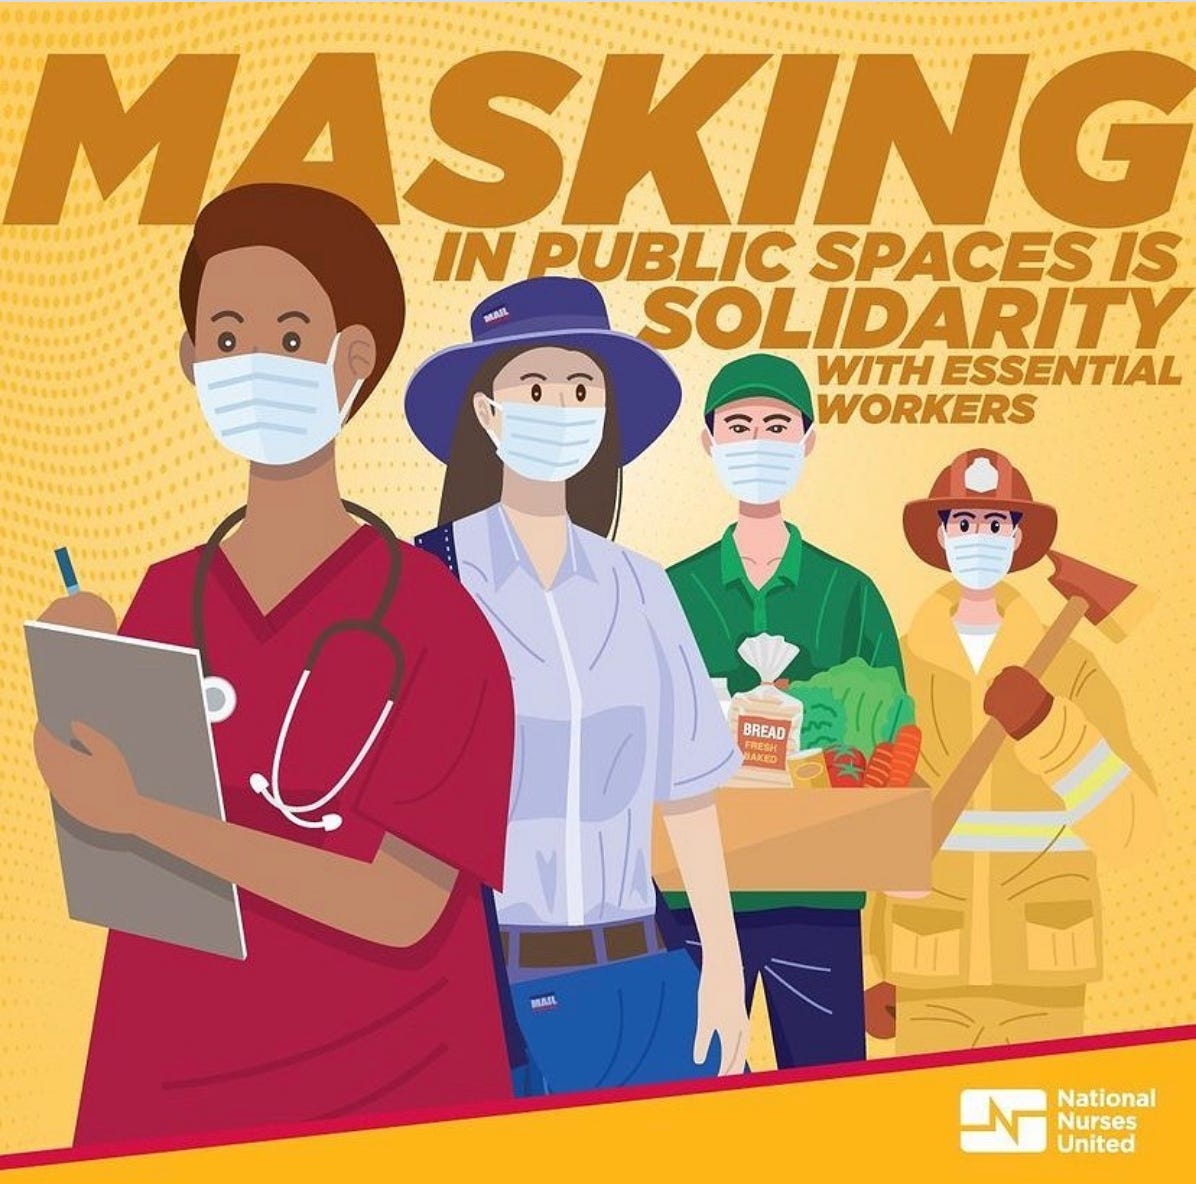 This National Nurses United graphic art image is of people dressed as healthcare worker, a postal worker, a grocery worker, and a fire fighter and the caption says Masking in public spaces is solidarity with essential workers